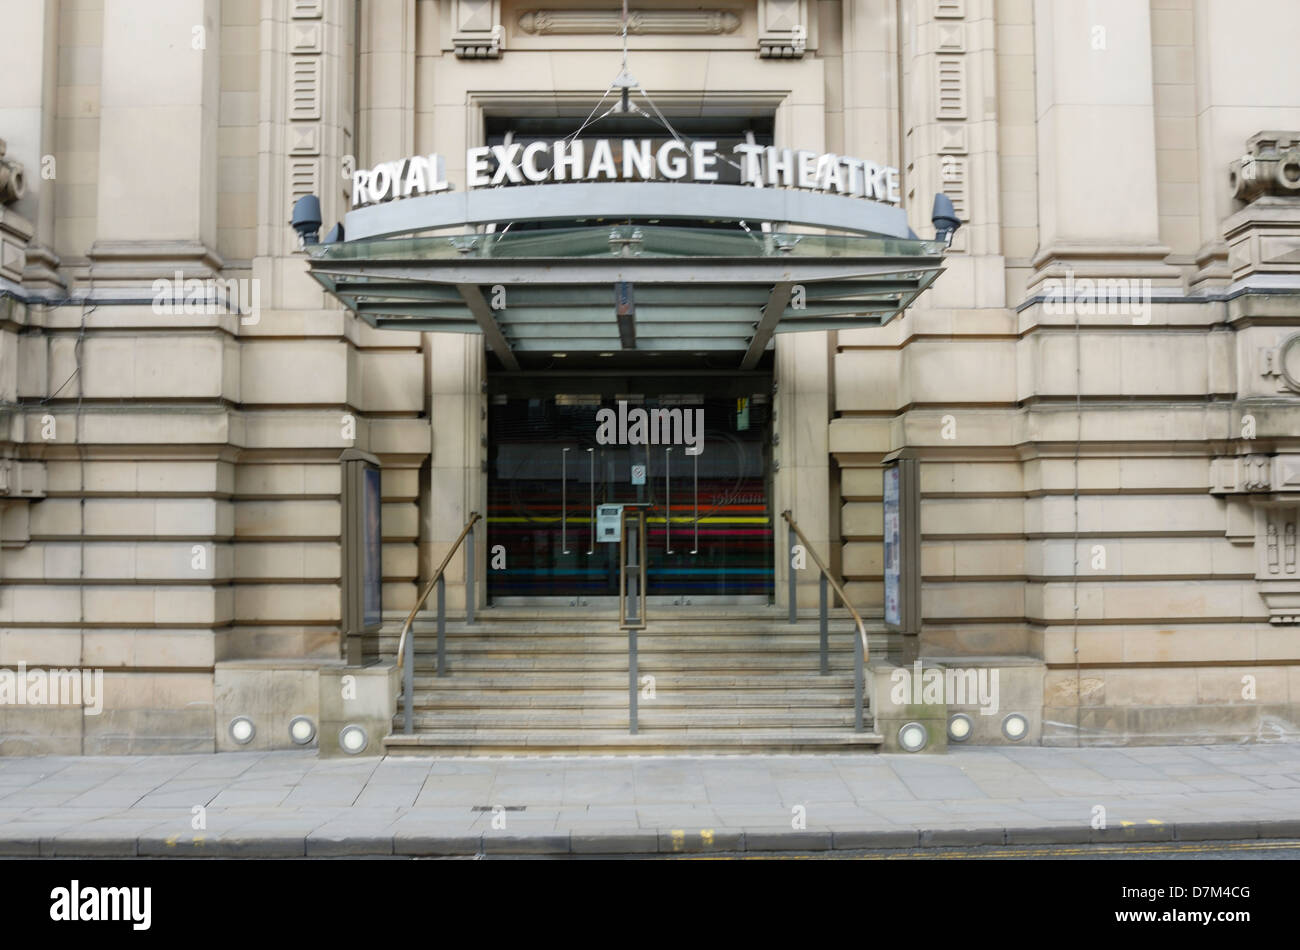 Royal Exchange Theatre in Manchester Stockfoto